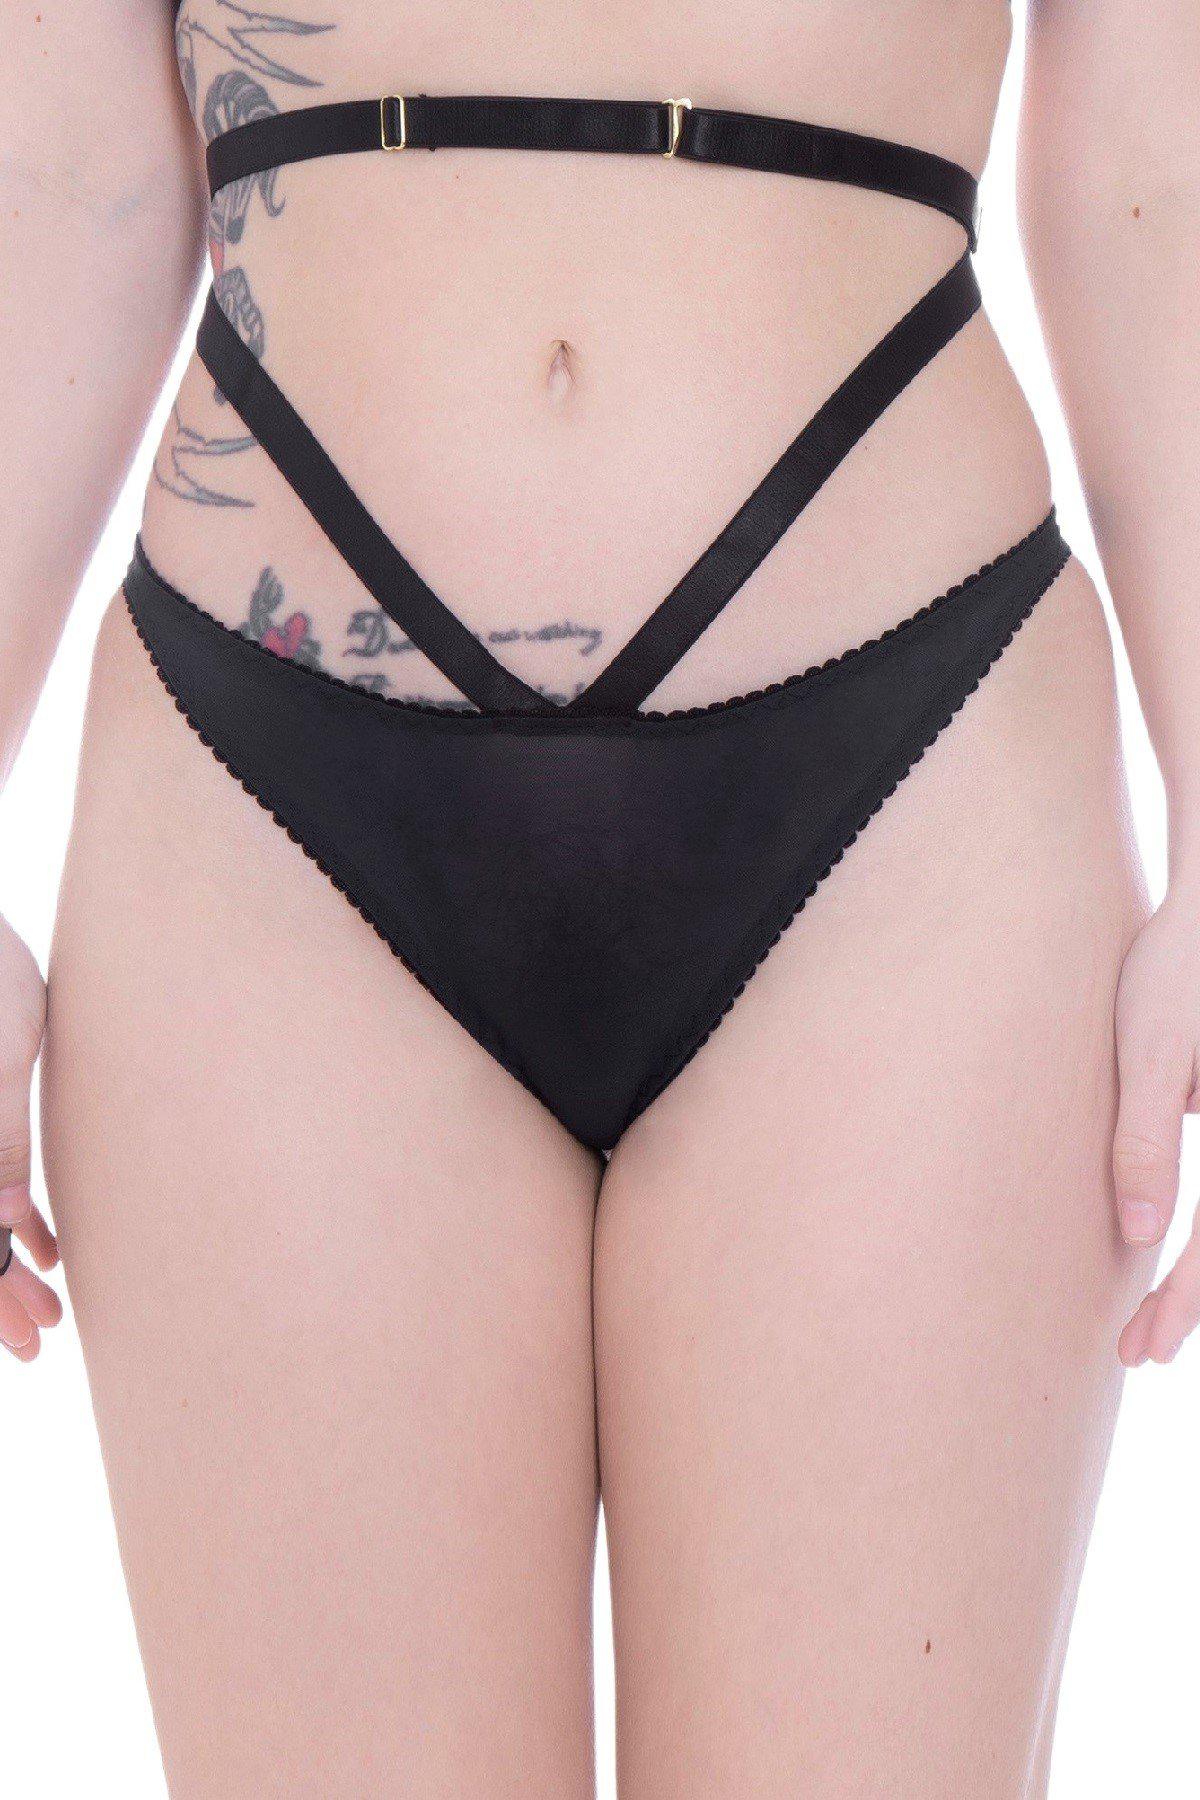 ColieCo Lingerie on X: MIDNIGHT strappy thong - harness panties in  sustainably sourced see through black mesh, low rise knickers, perfect  handmade lingerie gift  #ColieCo #SustainableFashion  #EthicalLingerie #StrappyKnickers